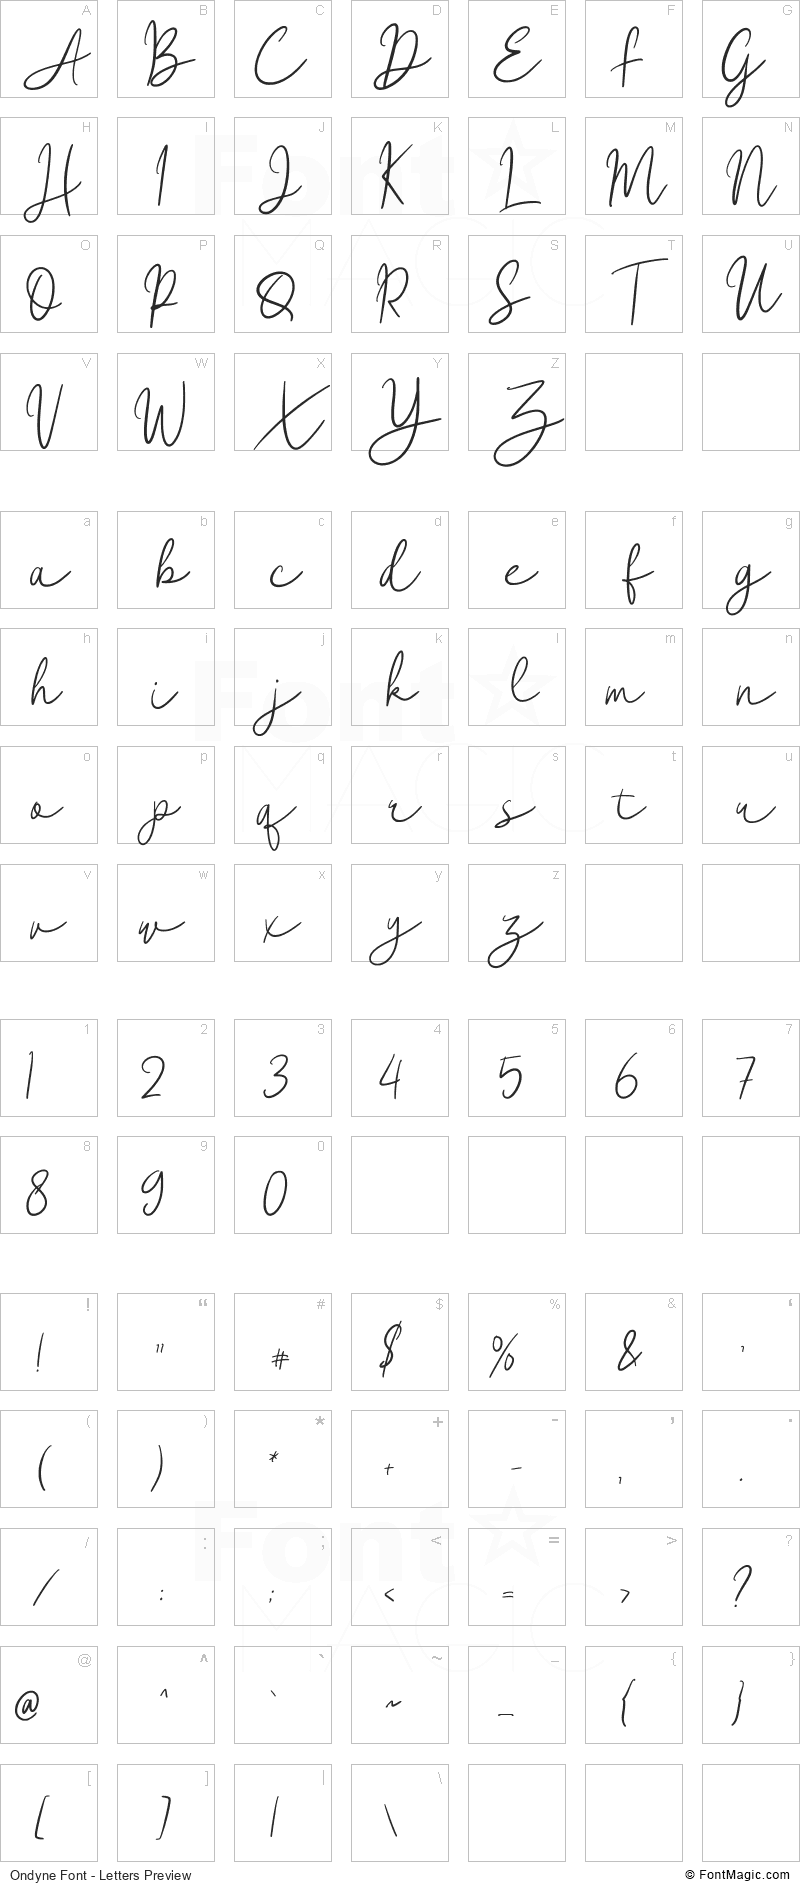 Ondyne Font - All Latters Preview Chart